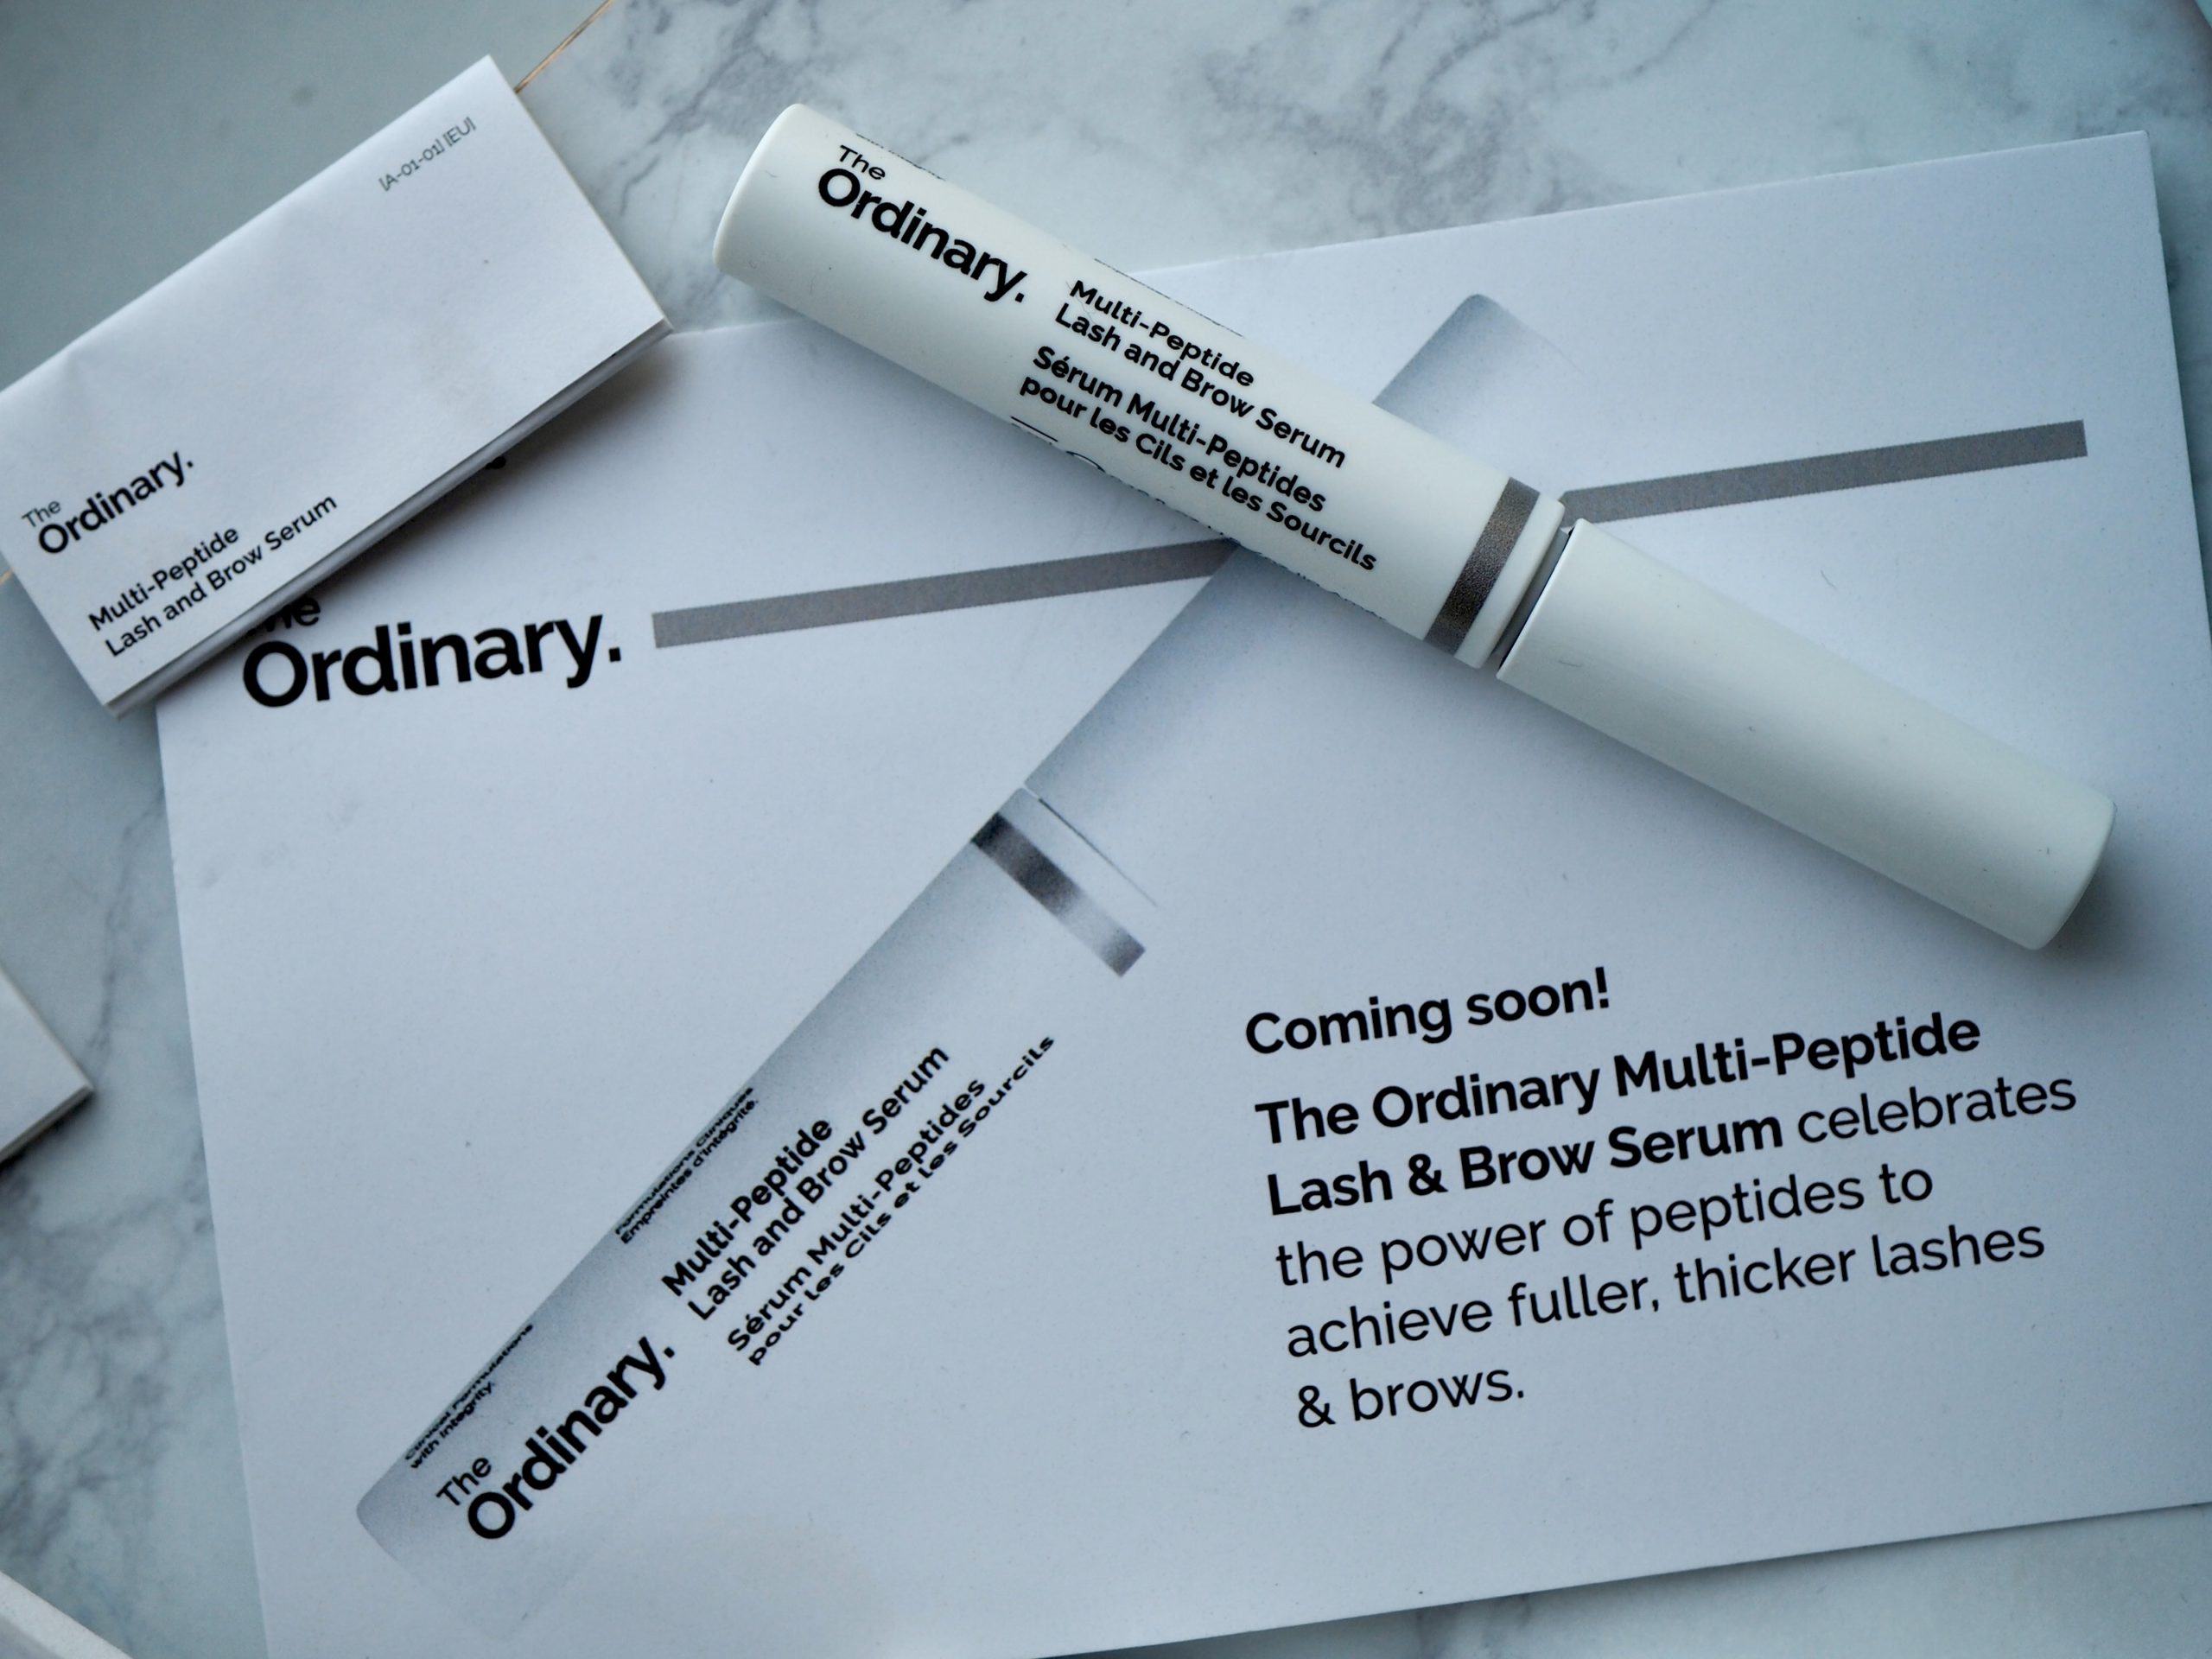 Does The Ordinary Multi-Peptide Lash and Brow Serum Work?